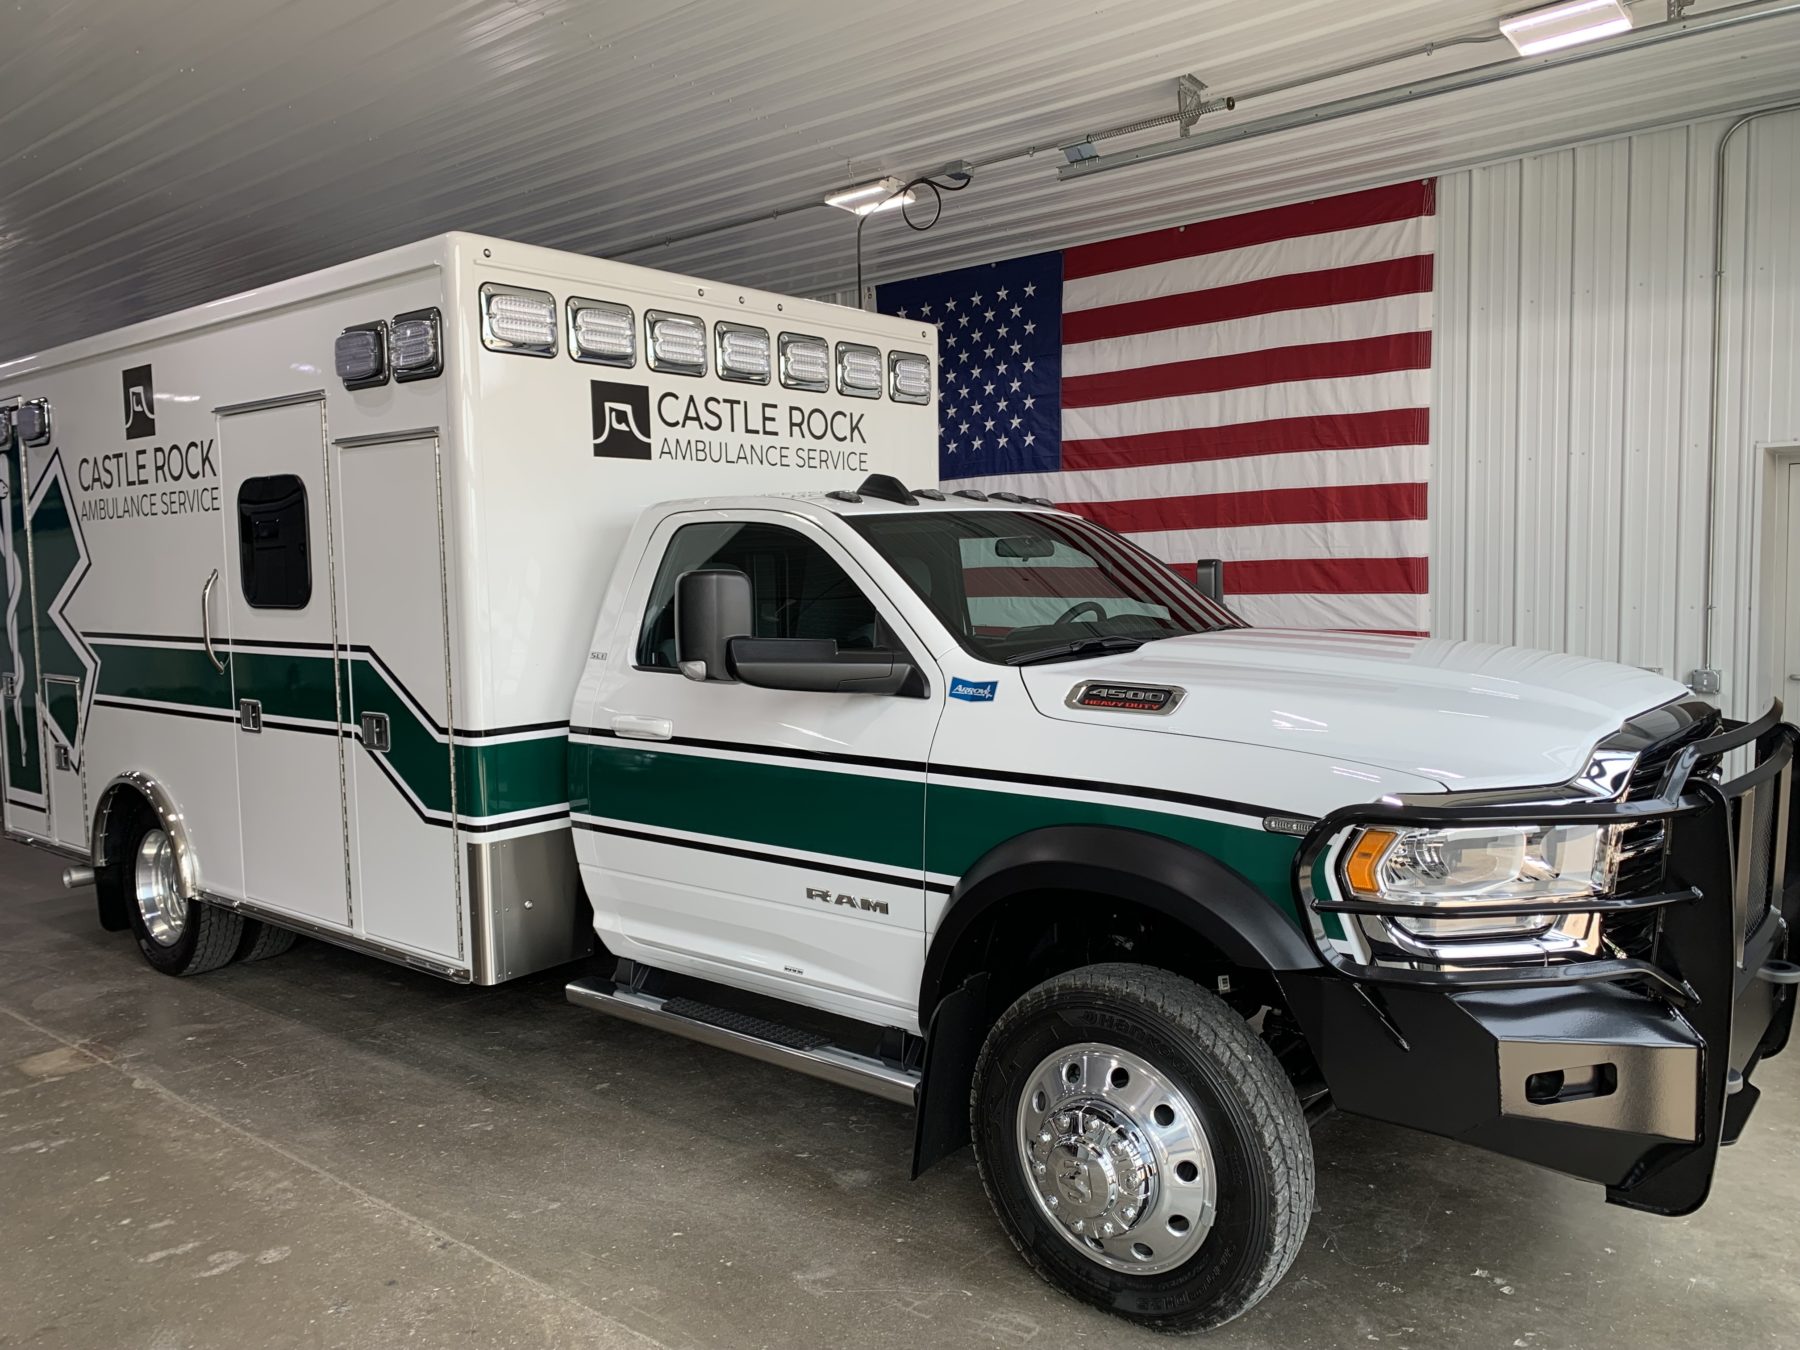 2021 Ram 4500 4x4 Heavy Duty Ambulance For Sale – Picture 1